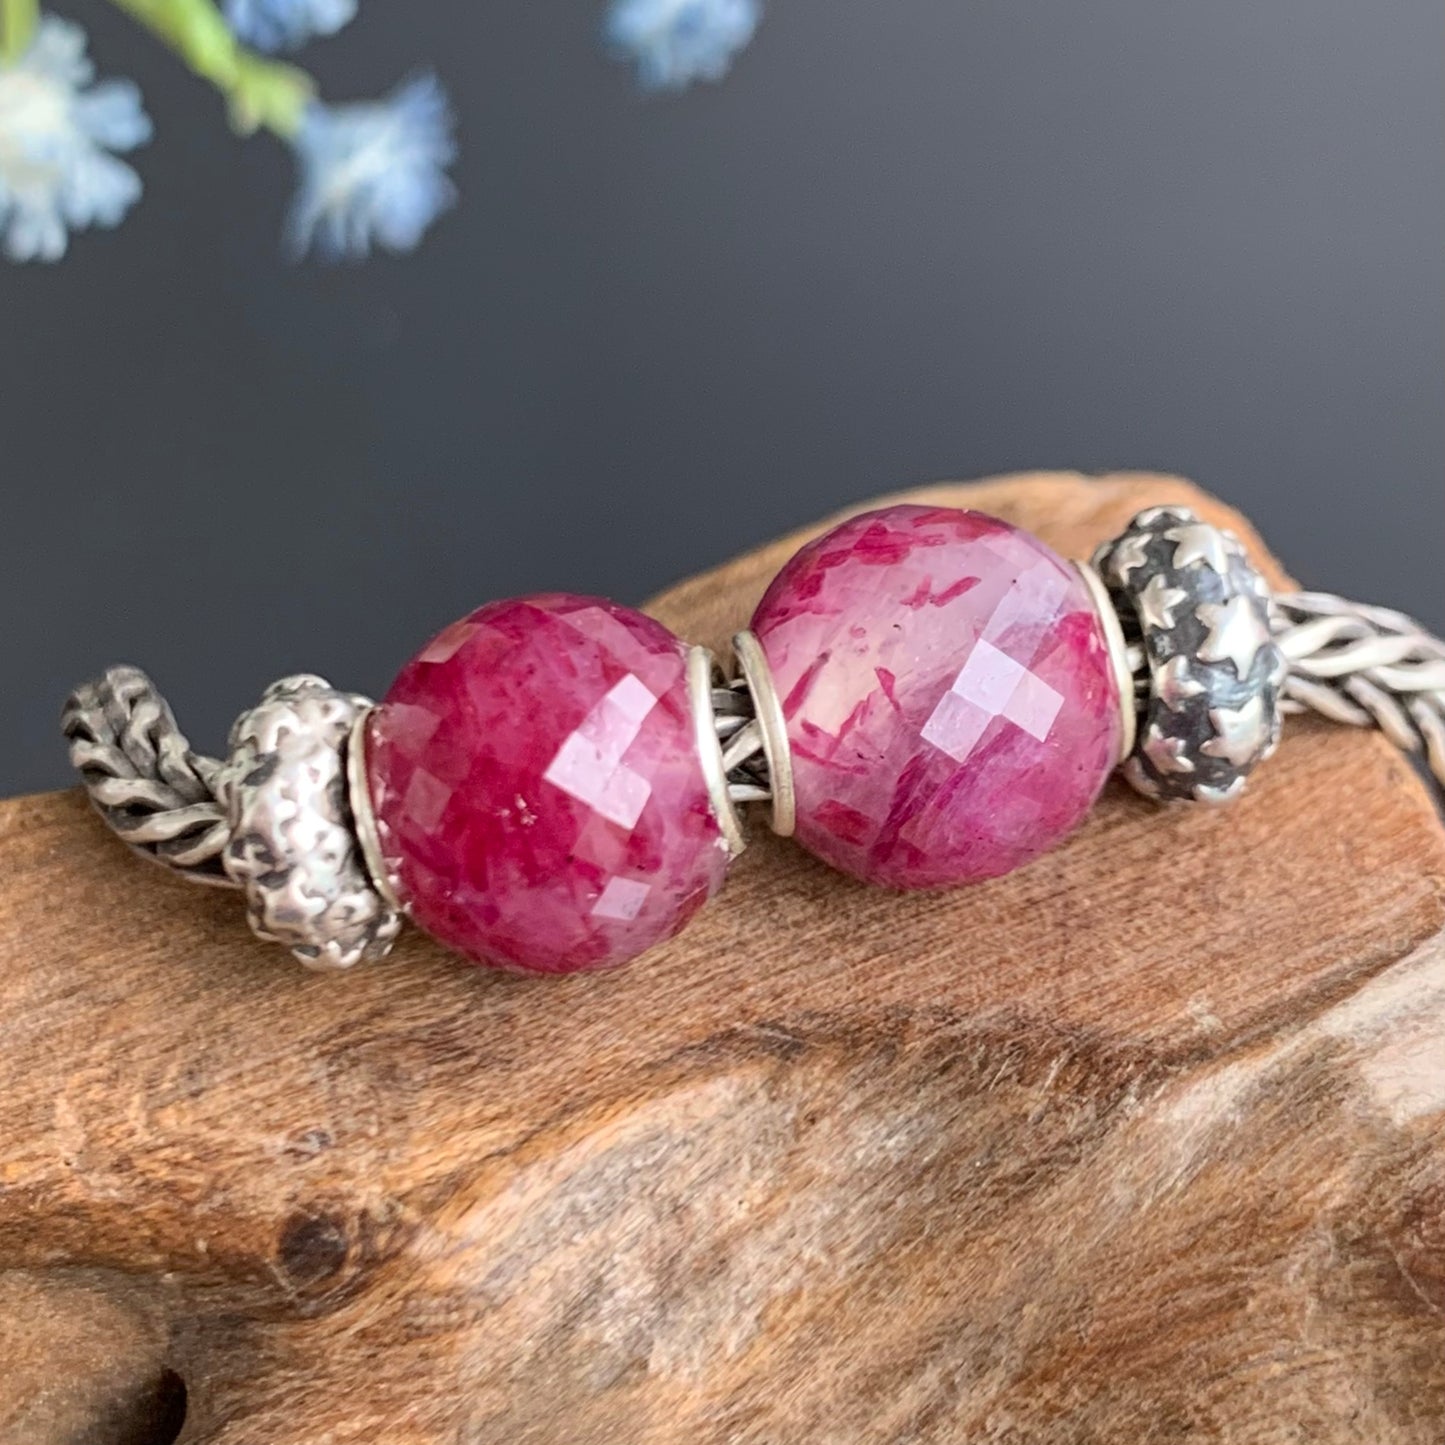 Natural Faceted Round Ruby Beads Ruby Hand Made Jewelry with Small Core for Charm Bracelets